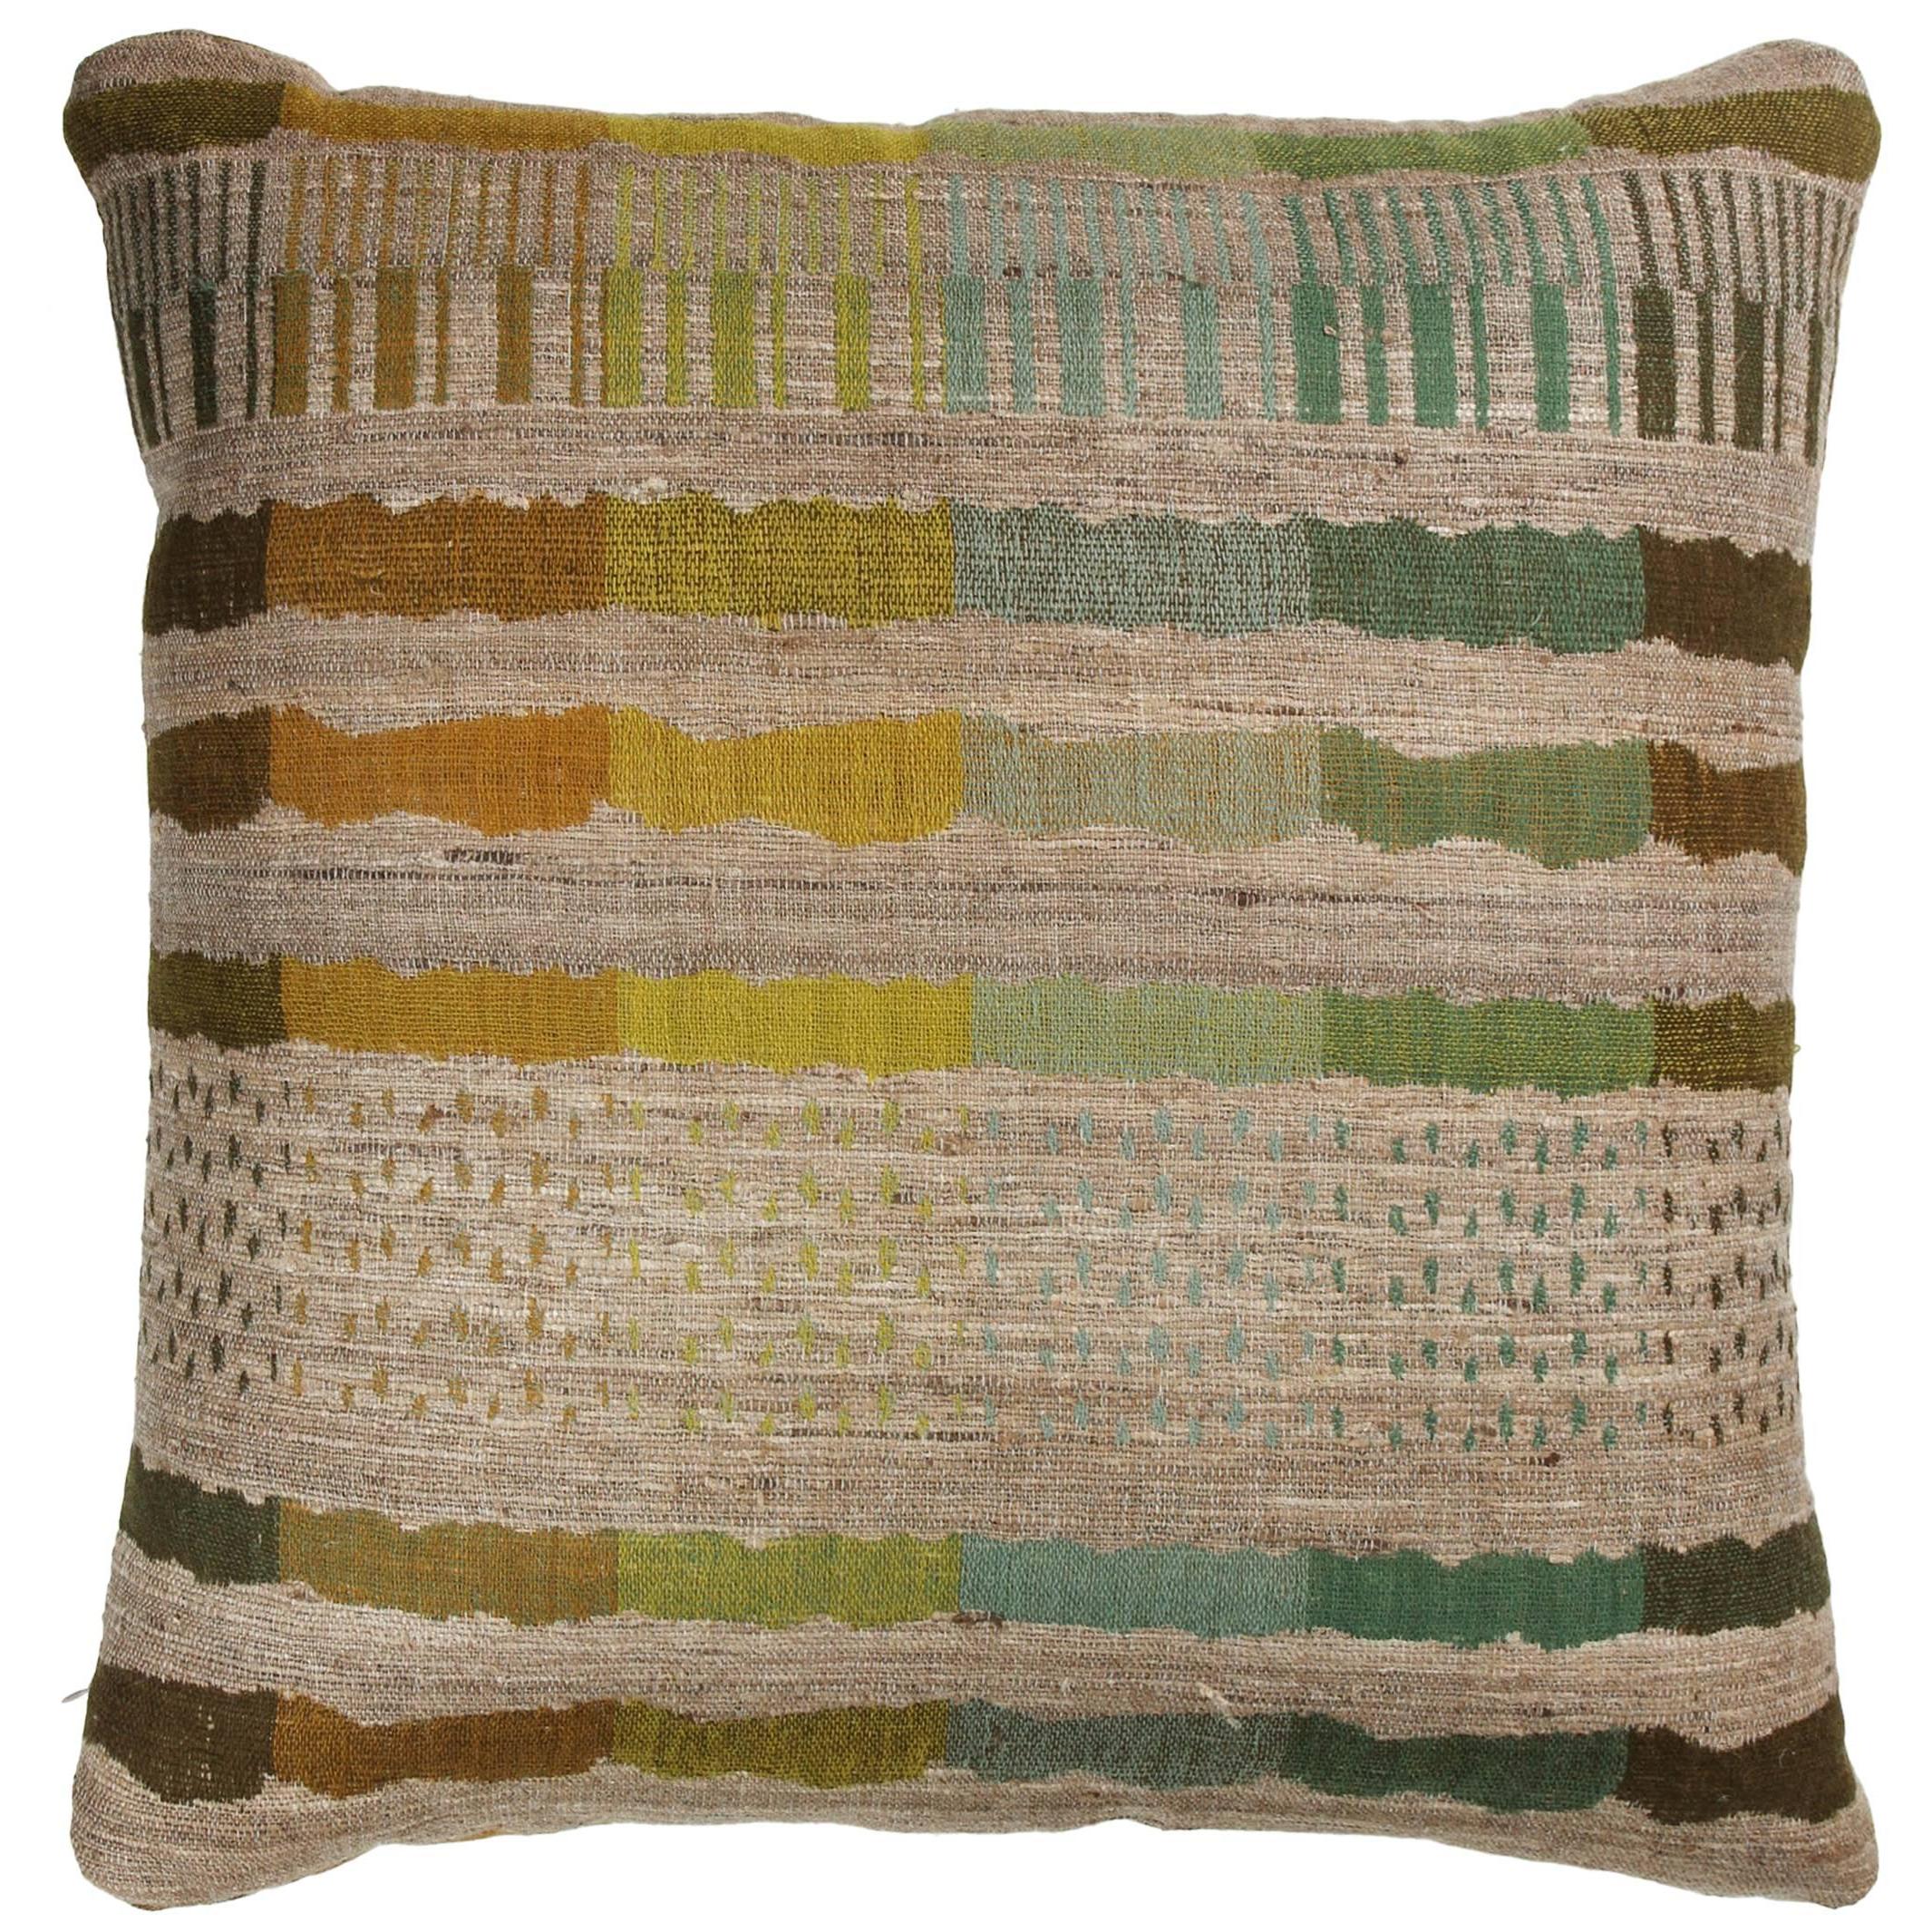 Indian Handwoven Pillow in Orange, Green, Brown, Blue and Beige For Sale